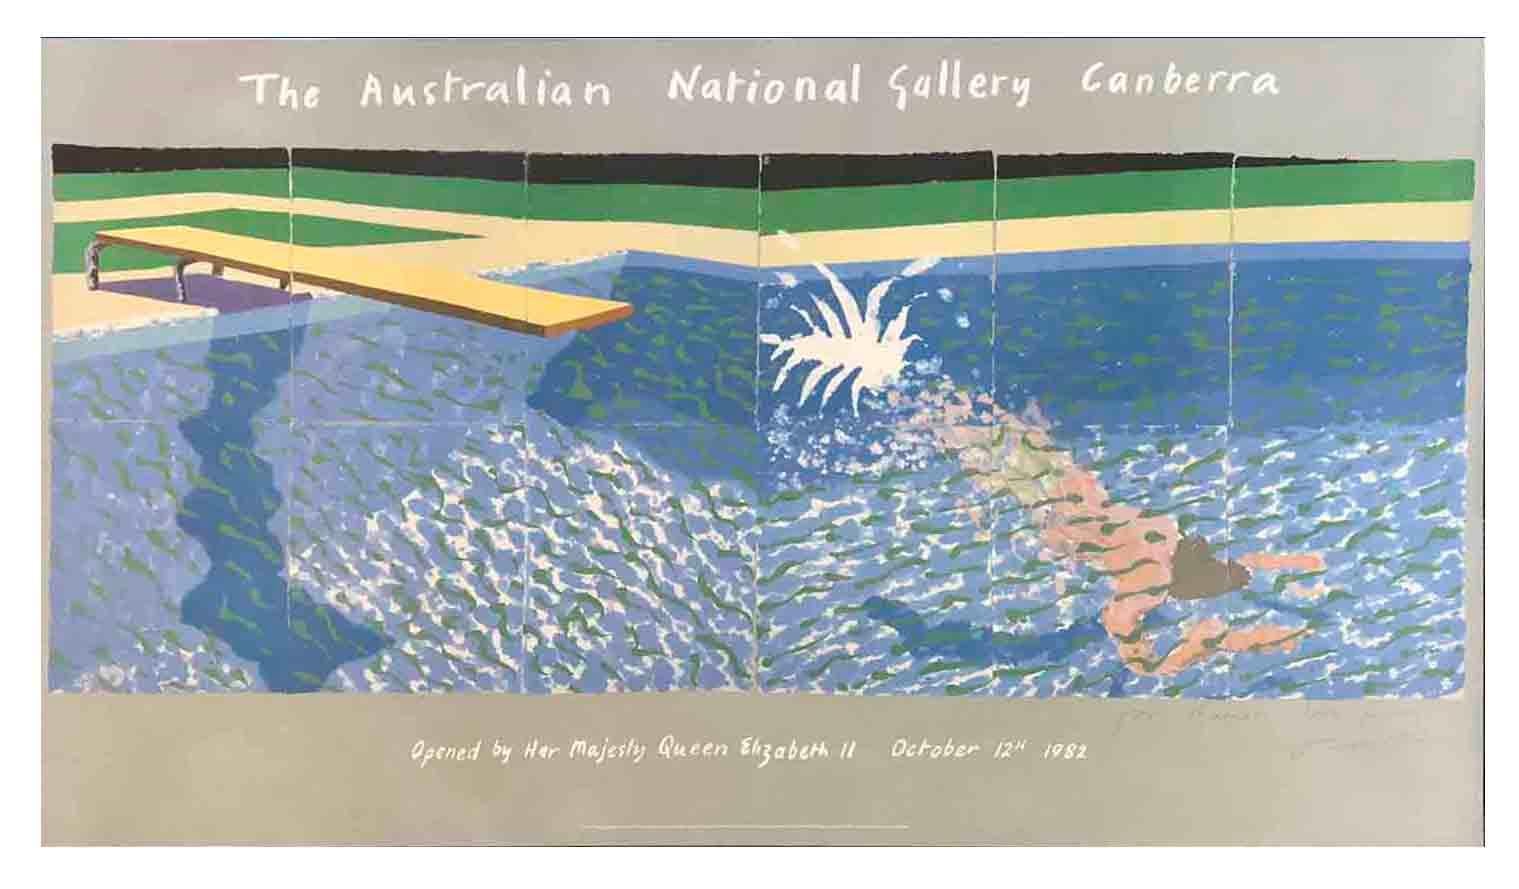 The Australian National Gallery Canberra - Contemporary Print by David Hockney